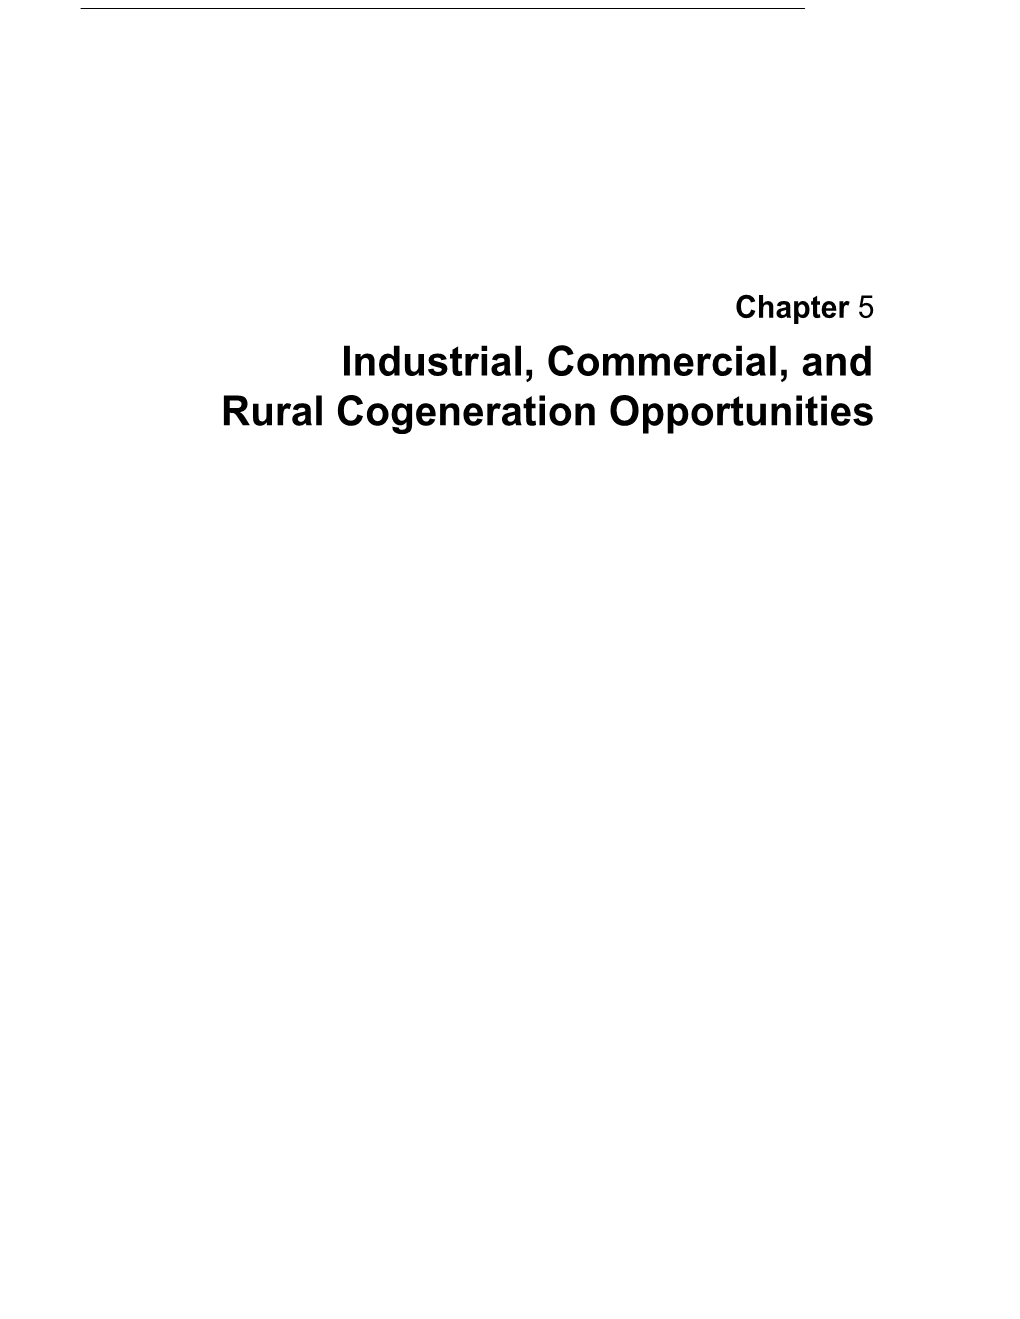 5: Industrial, Commercial, and Rural Cogeneration Opportunities